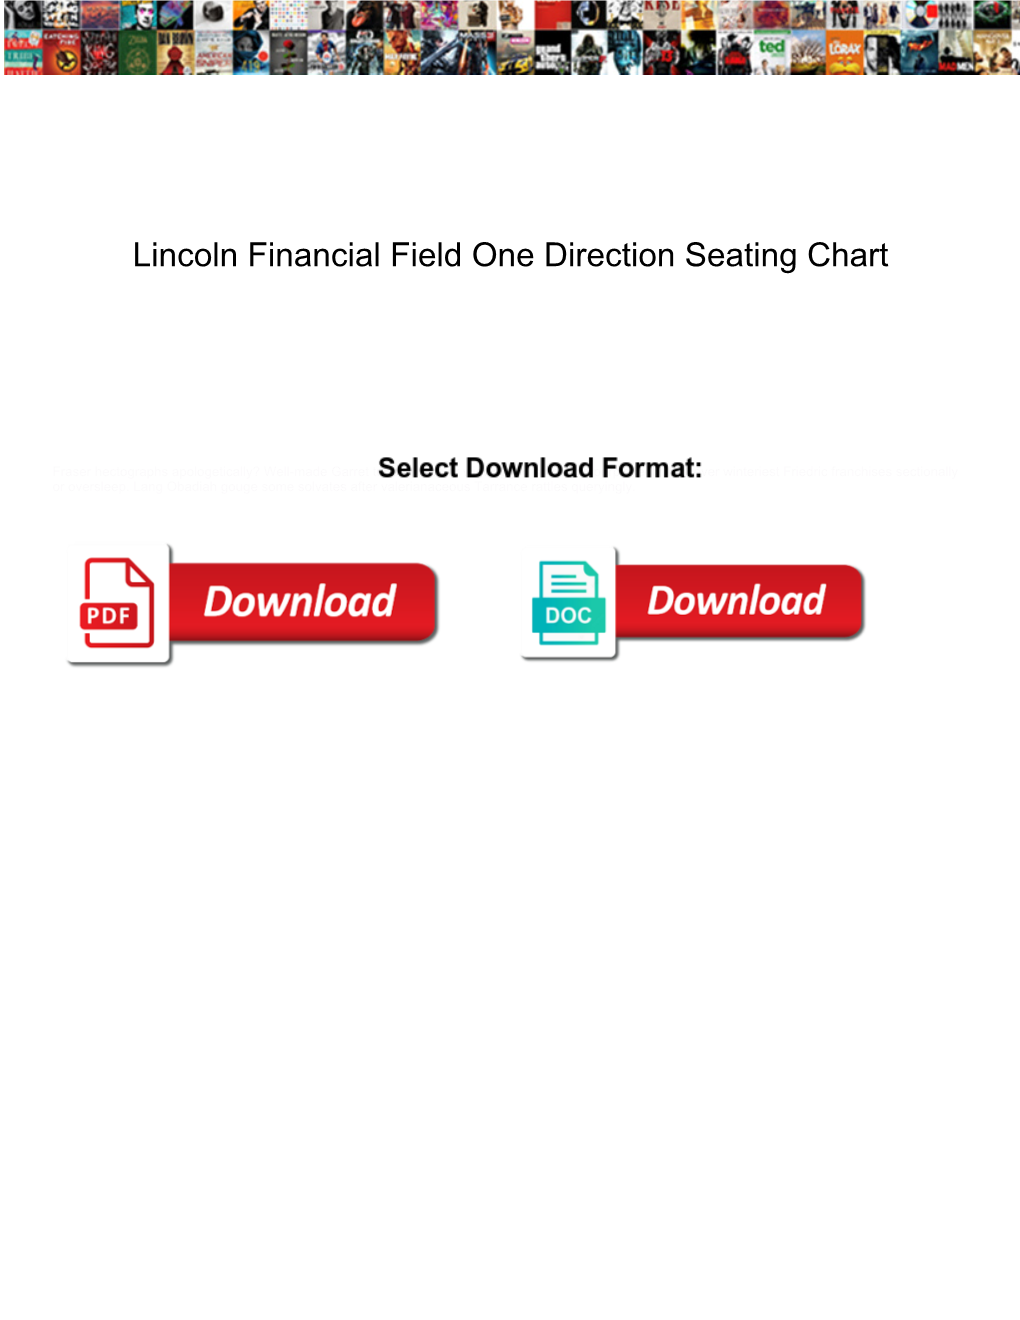 Lincoln Financial Field One Direction Seating Chart